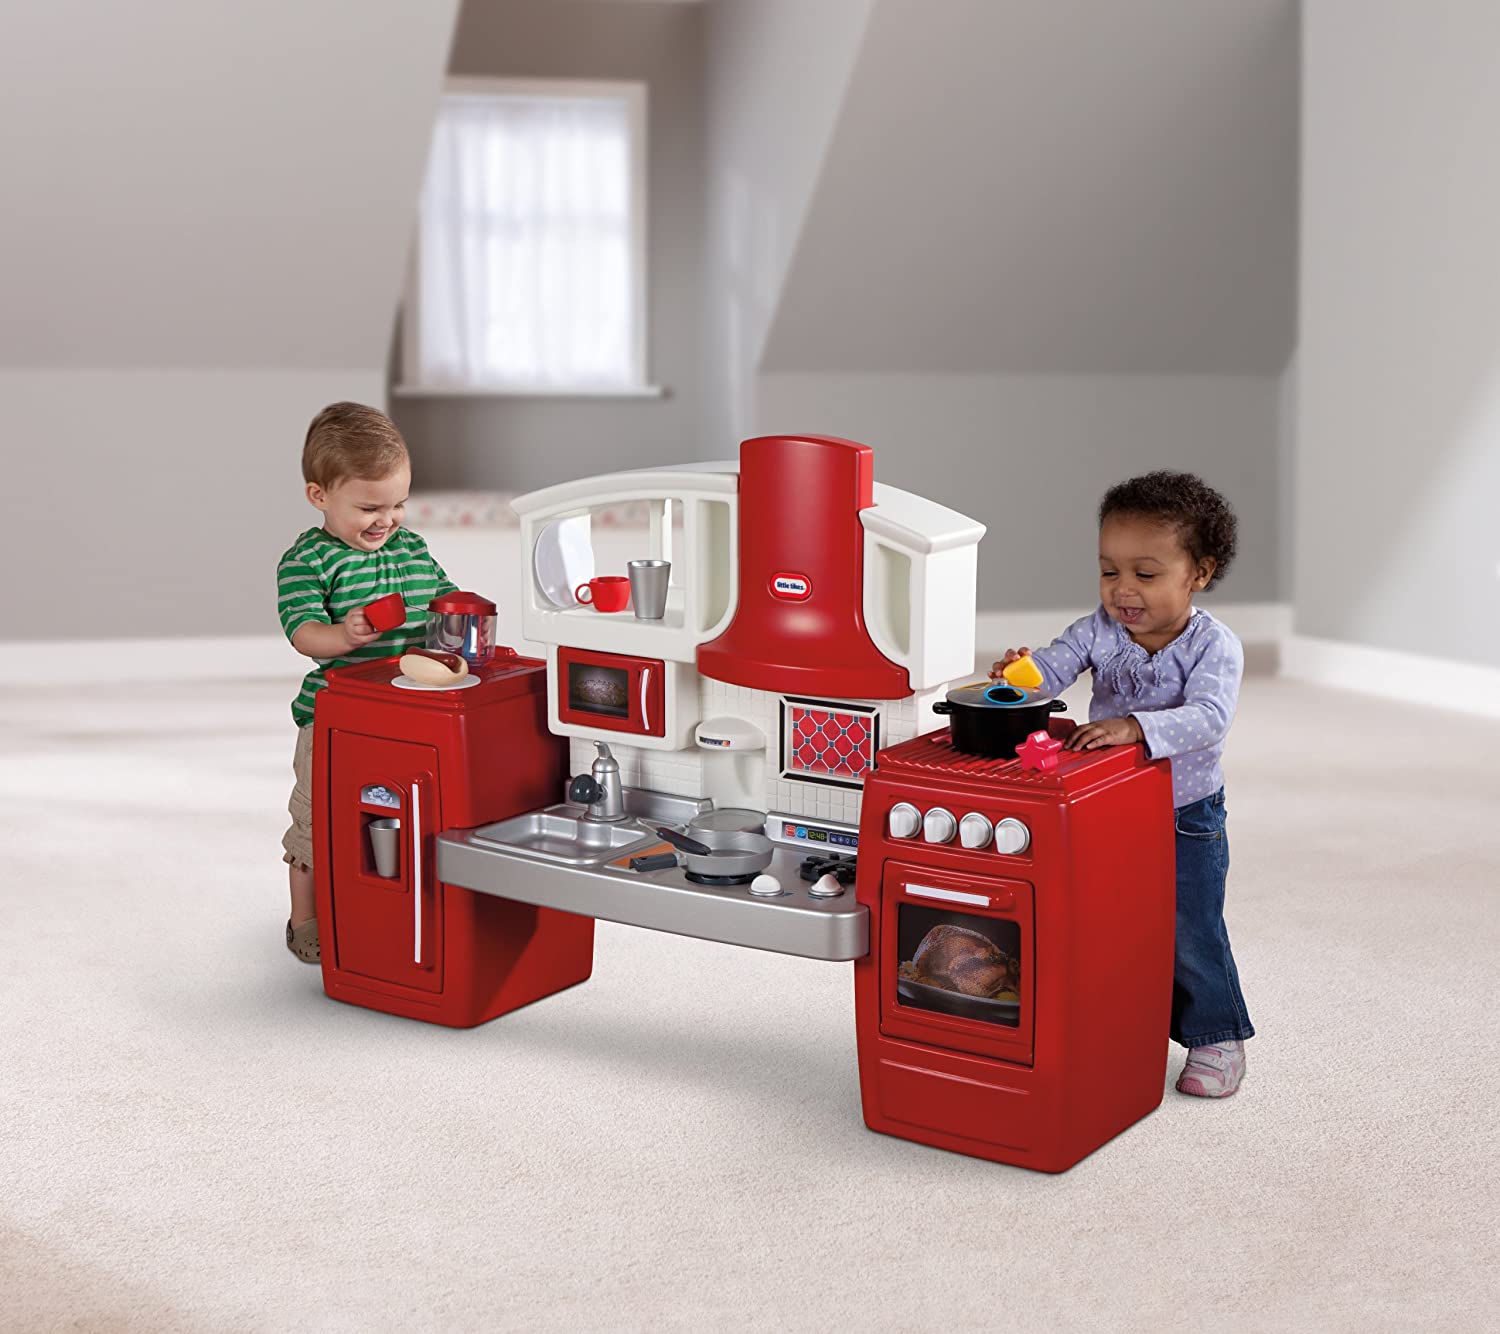 Little Tikes Cook 'n Grow Pretend Play Kids Toy Cooking Kitchen Play Set, Red - image 5 of 7